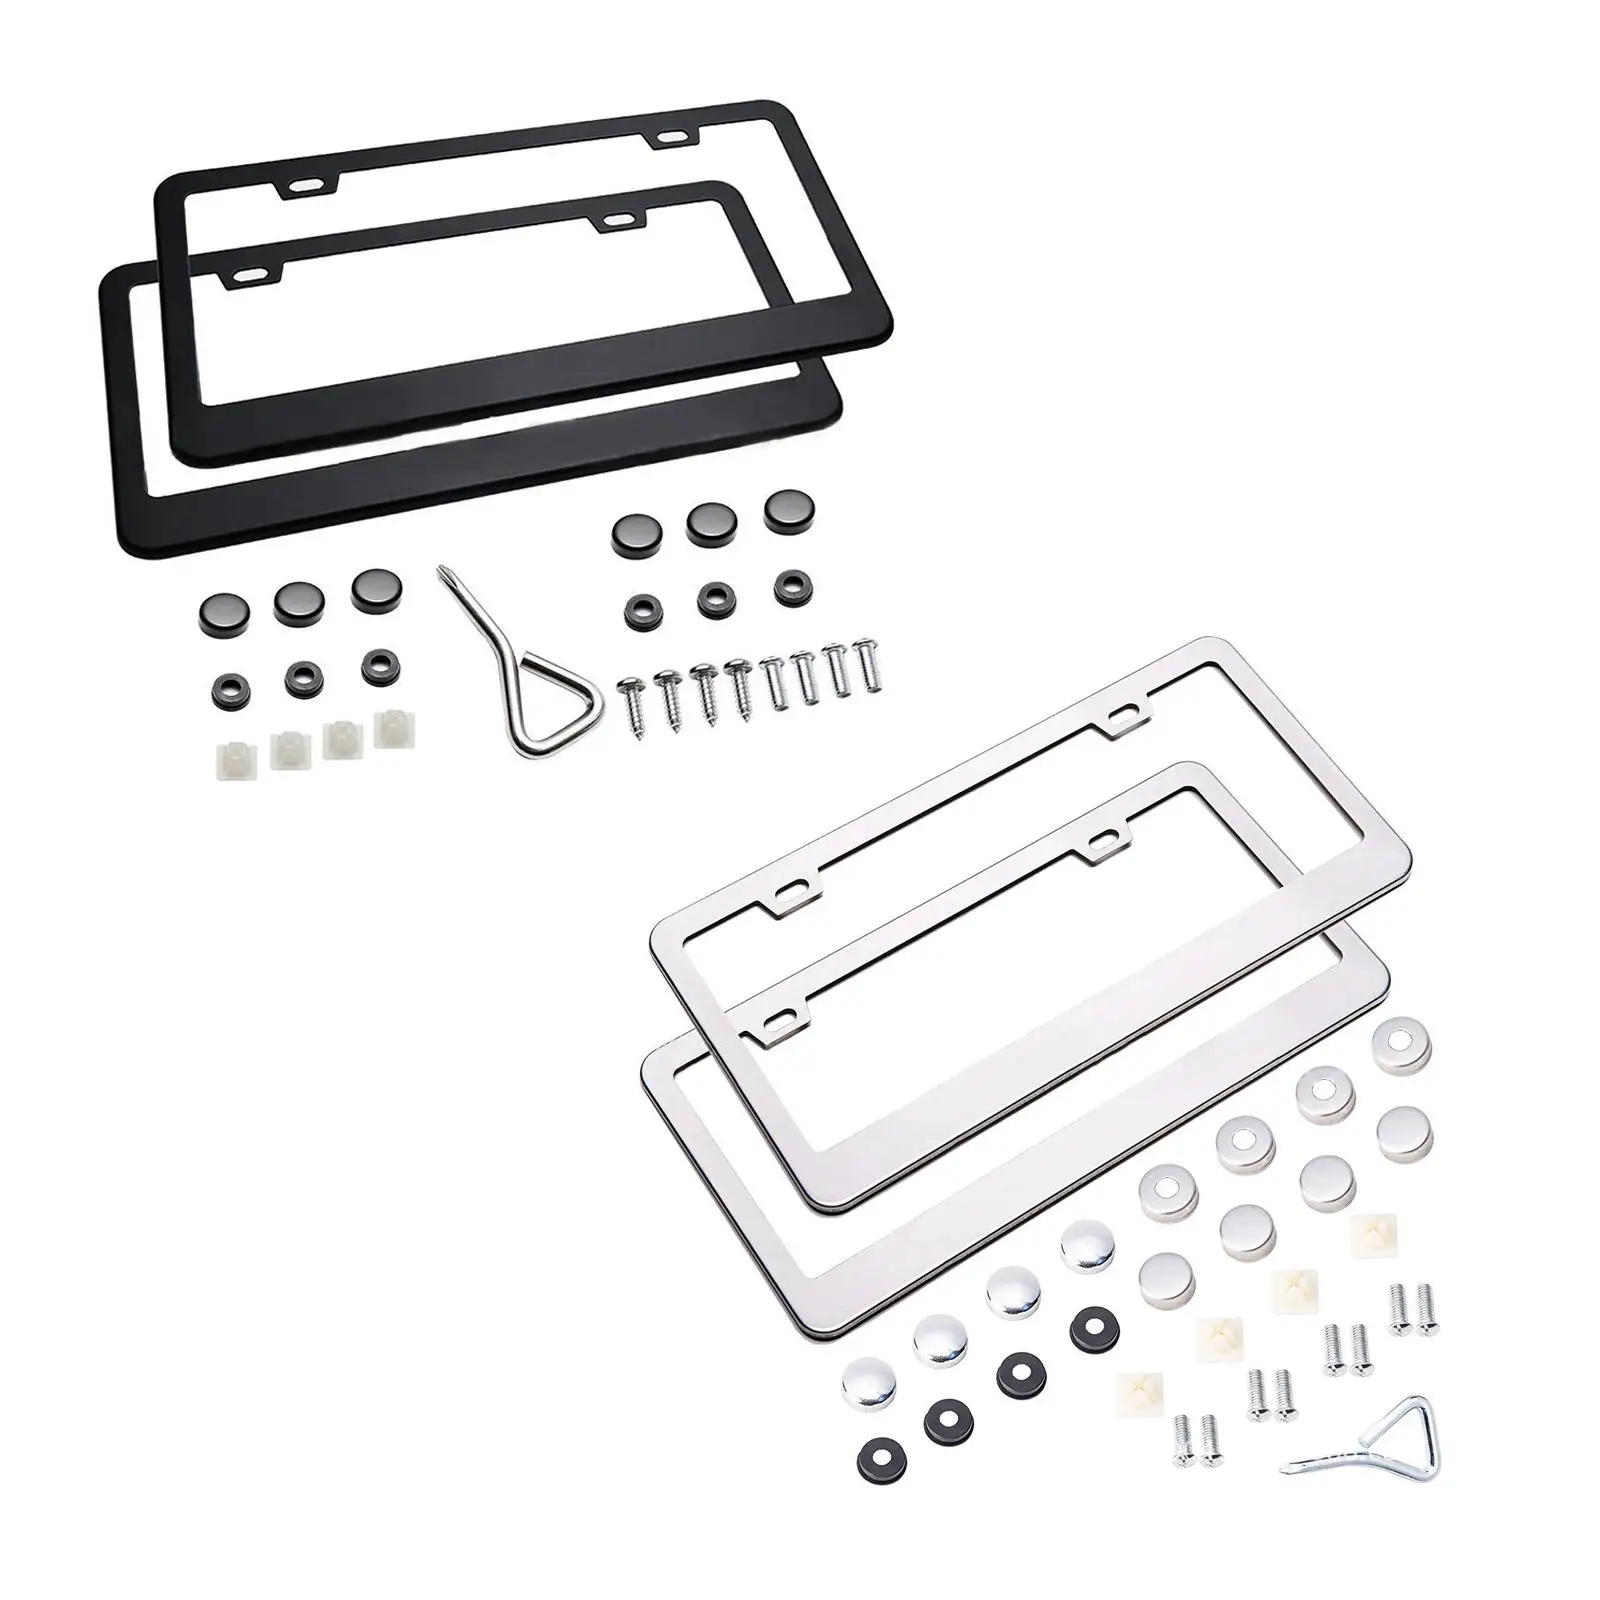 2 Pieces Car License Plate Frame Accessories Durable Easy to Install High Performance with Fixing Screws License Plate Bracket